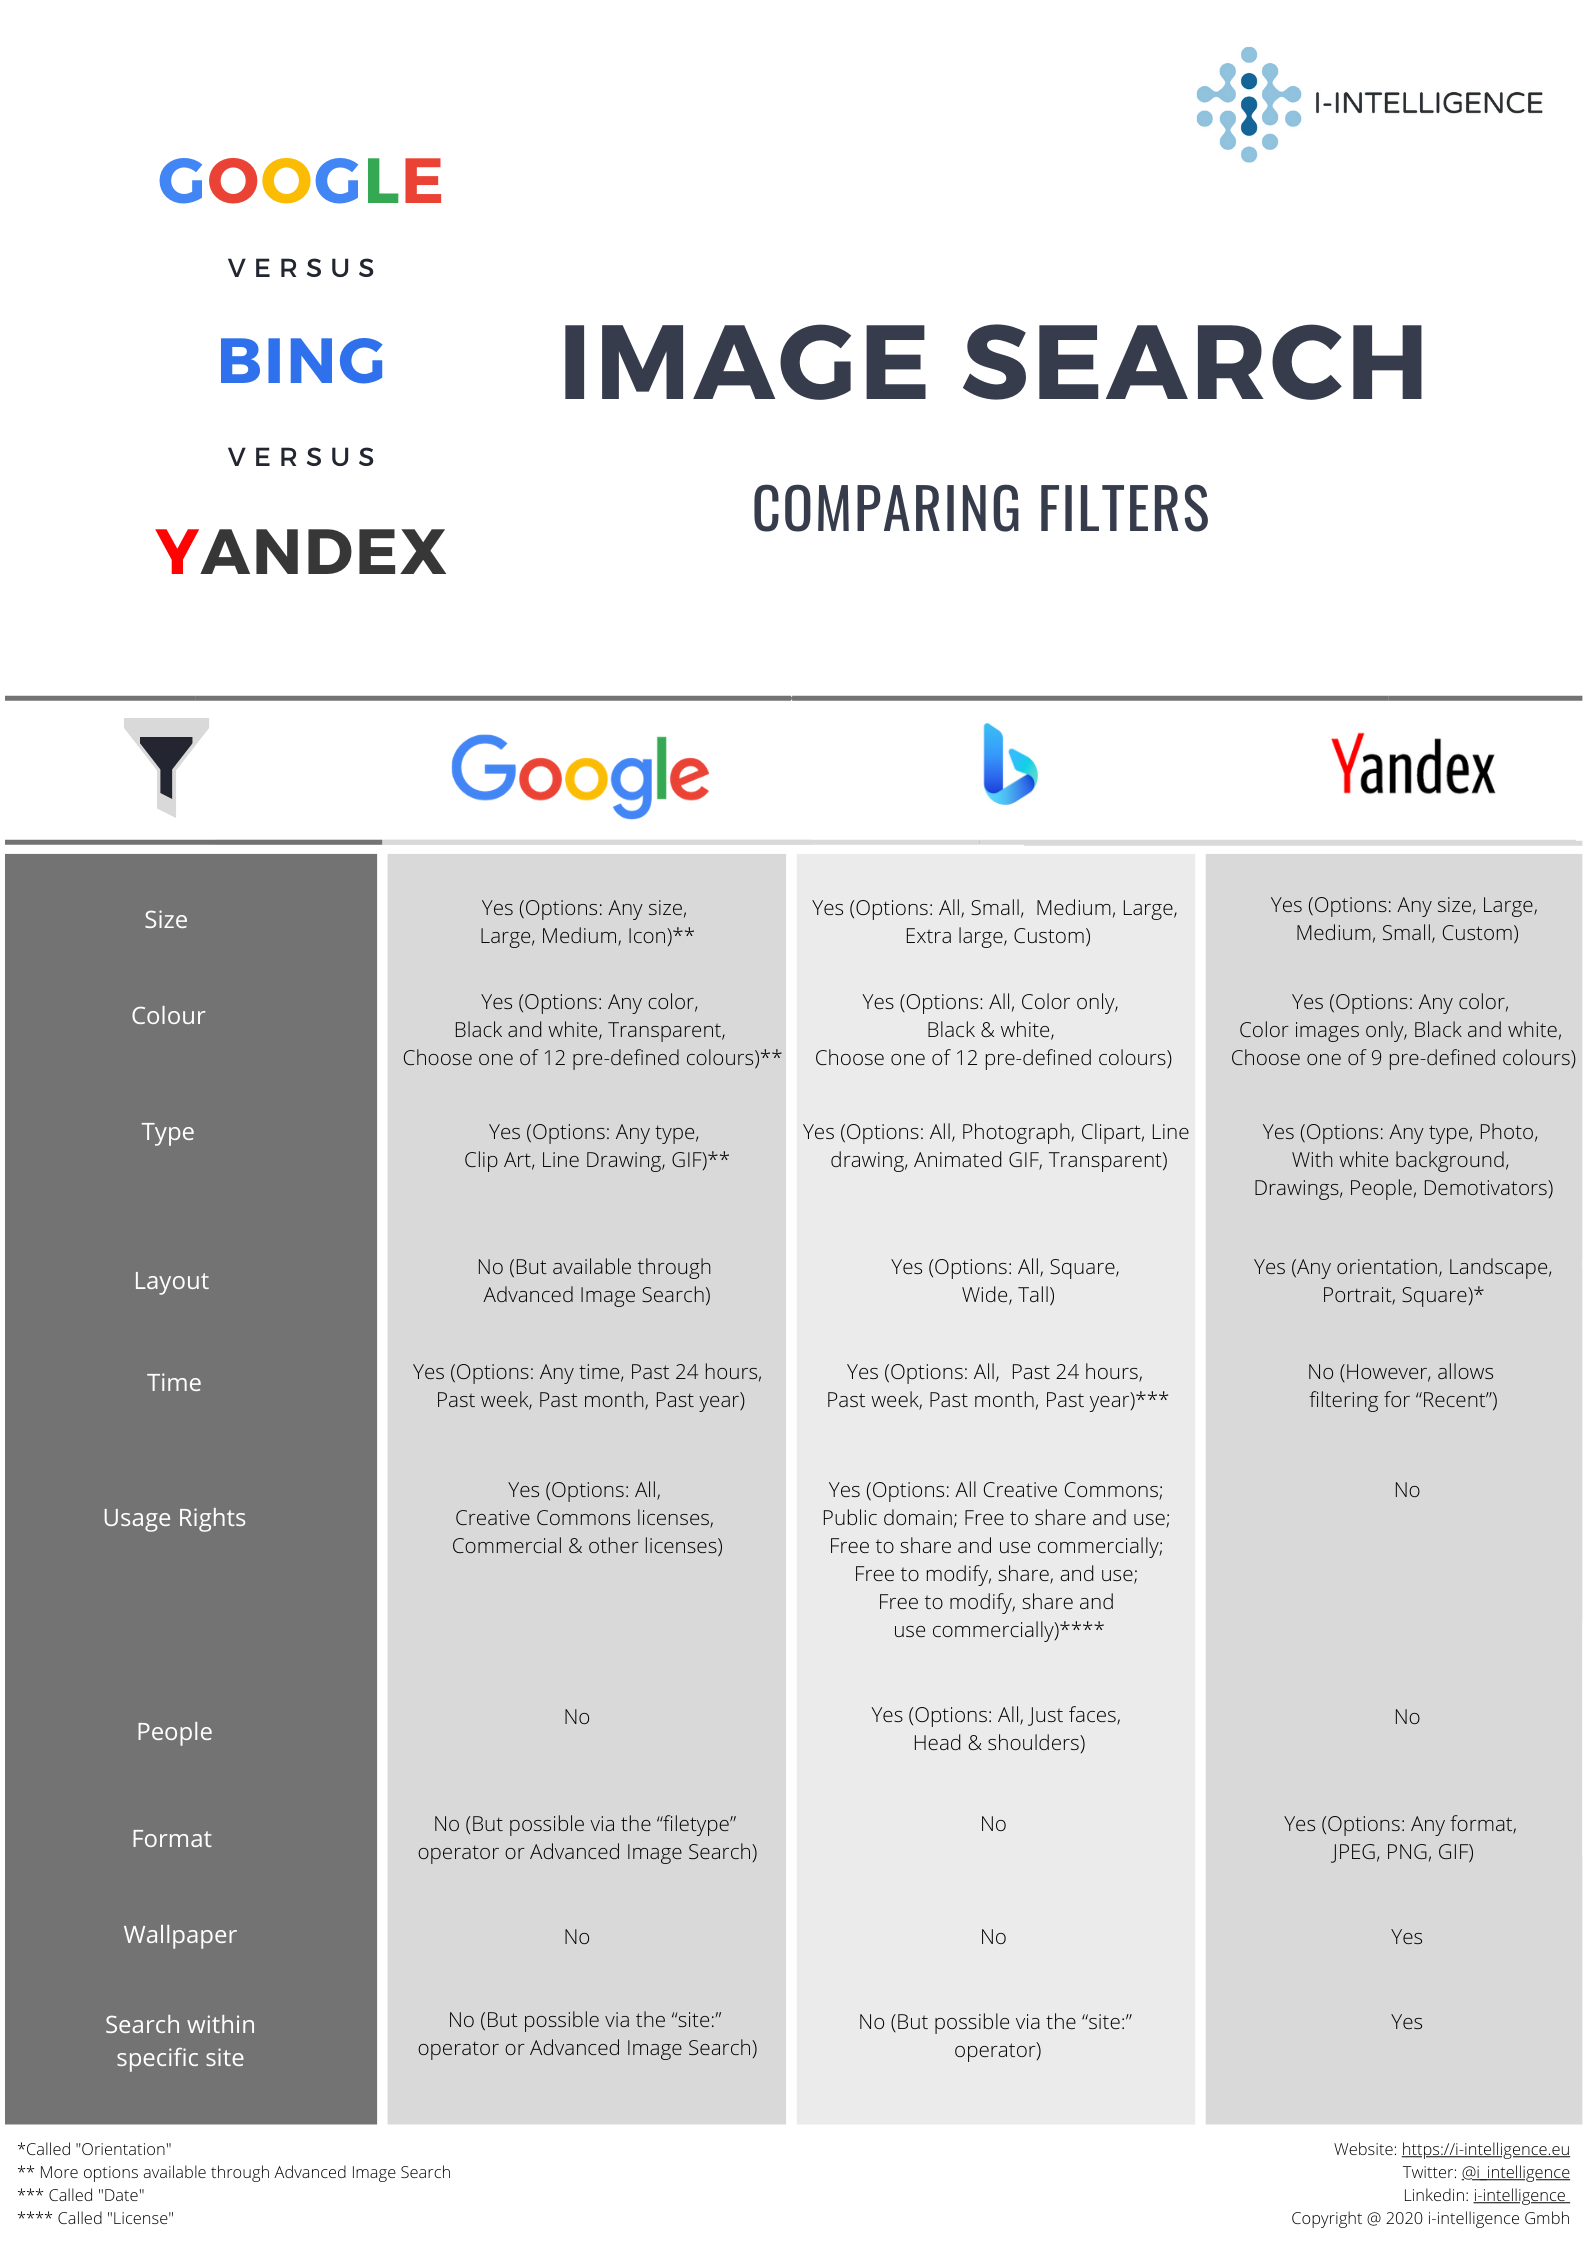 Why is Yandex better than Google Image Search?